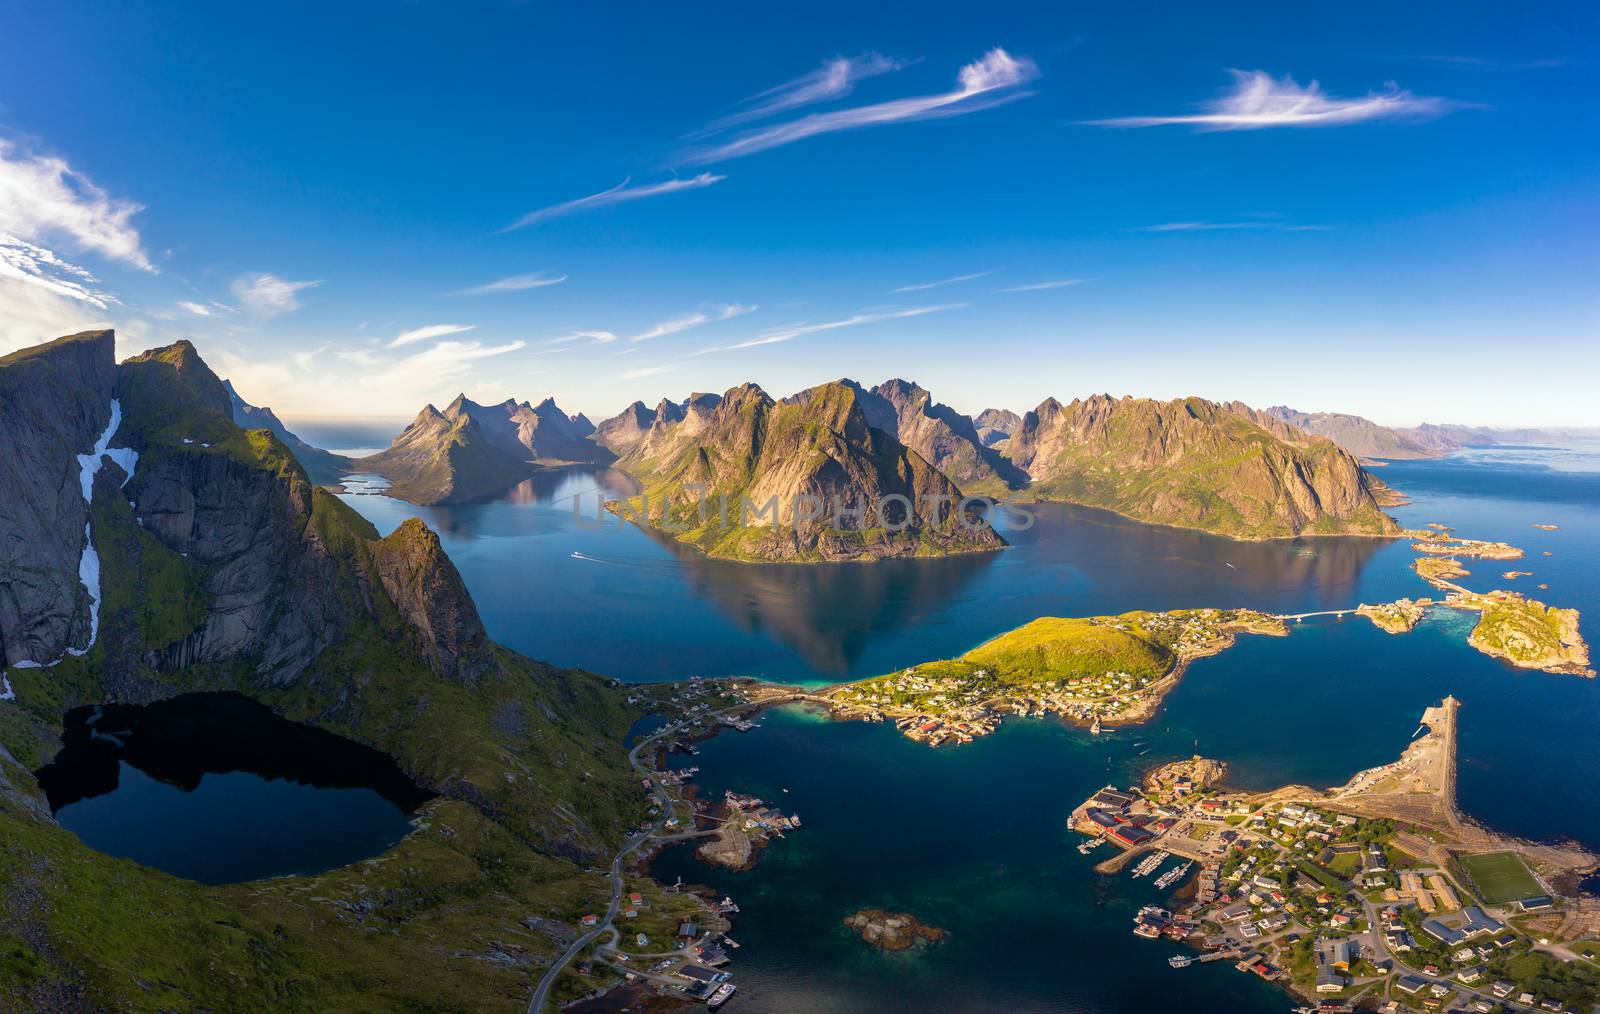 Panorama of mountains, fjords and fishing villages in Lofoten islands, Norway by nickfox